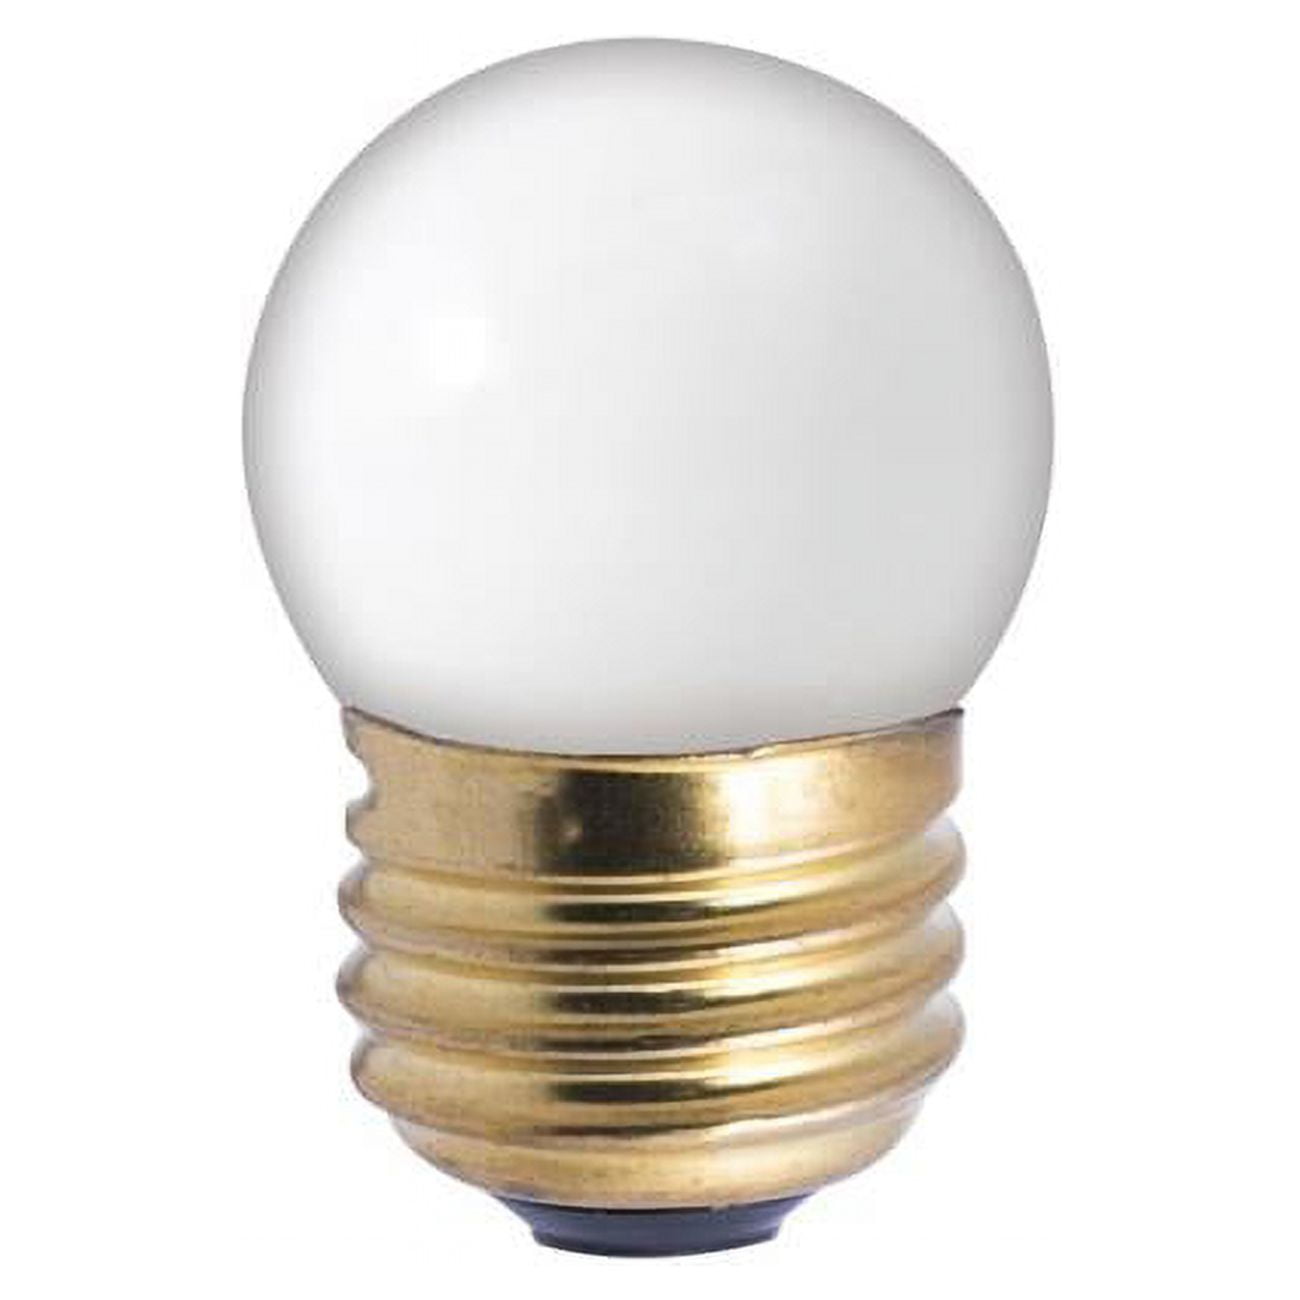 Picture of Bulbrite Pack of (25) 7.5 Watt Dimmable S11 Incandescent Light Bulbs with Medium (E26) Base  Ceramic White